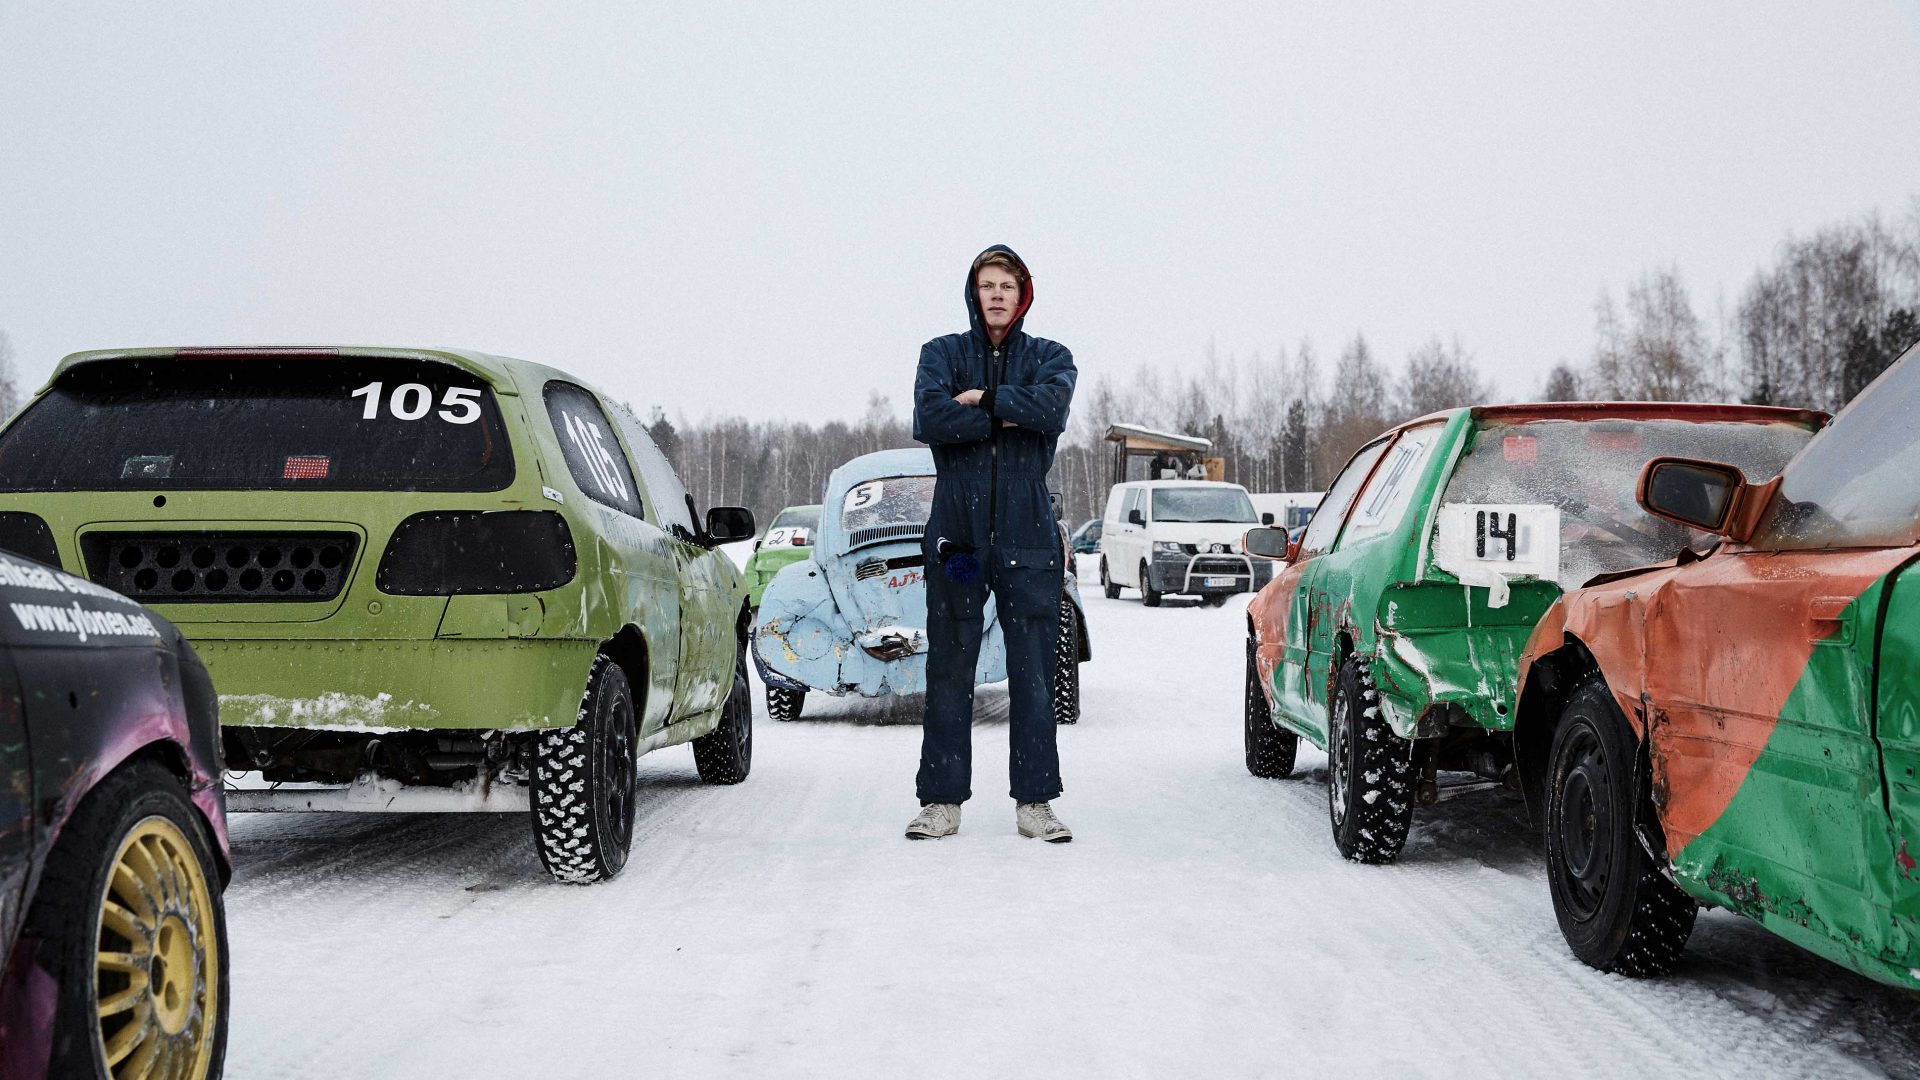 In Finland, there’s a death-defying DIY ice rally for the whole family